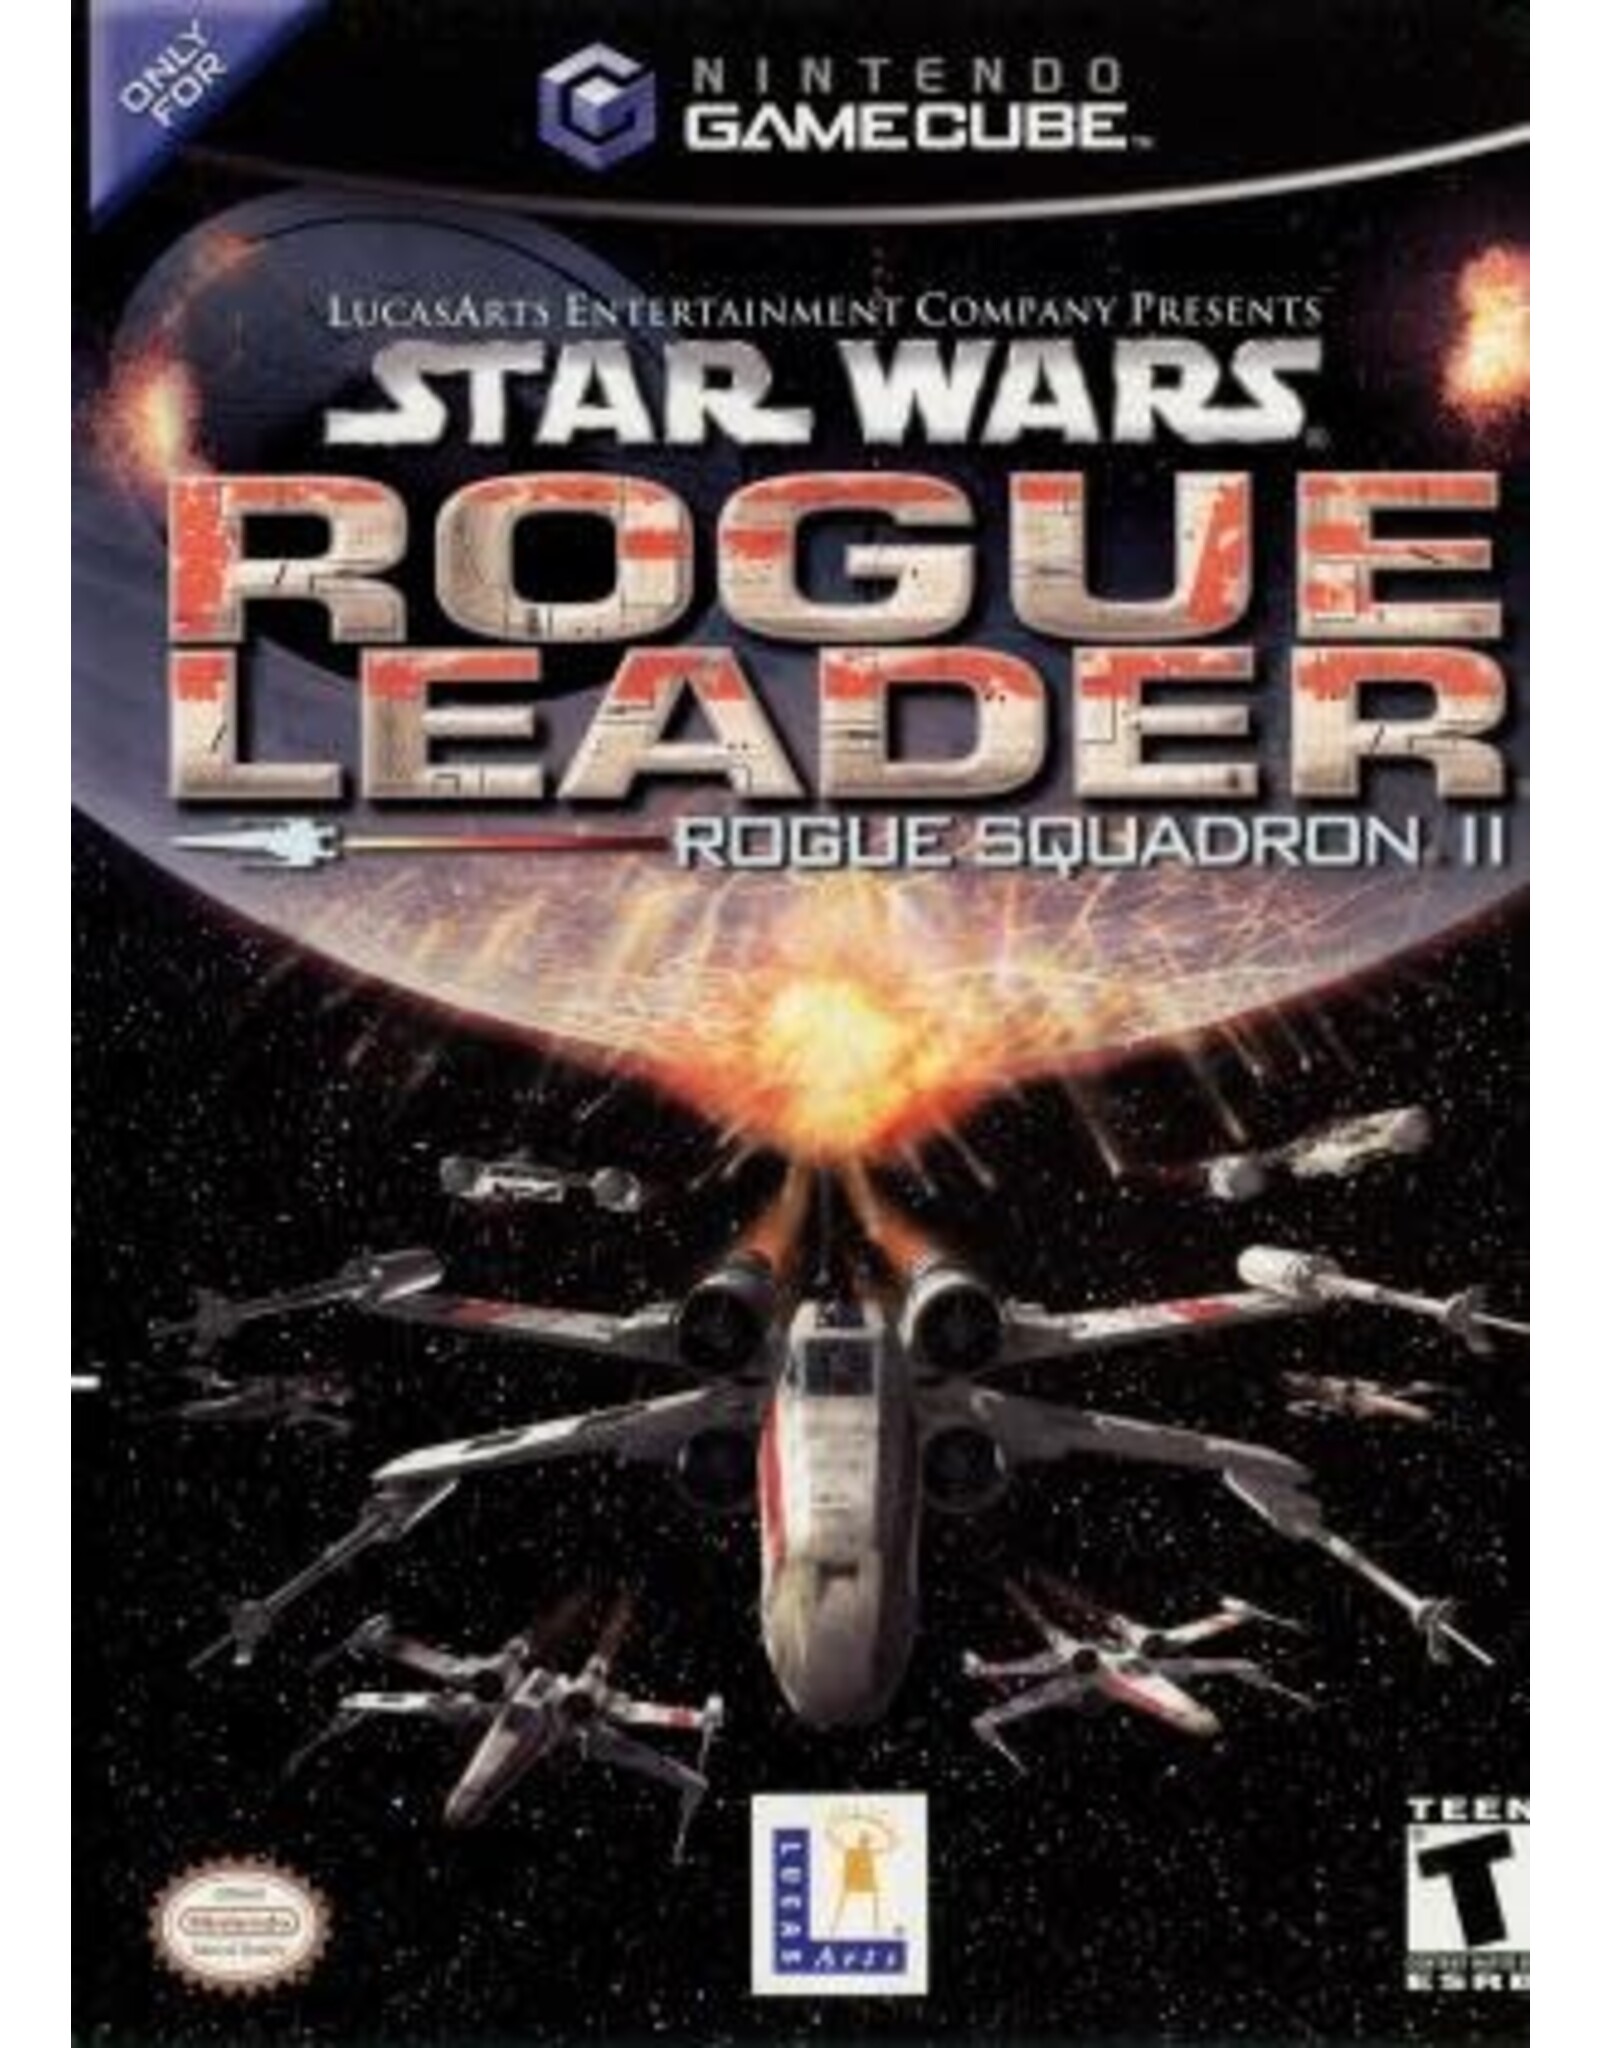 Gamecube Star Wars Rogue Leader (Used, Cosmetic Damage)